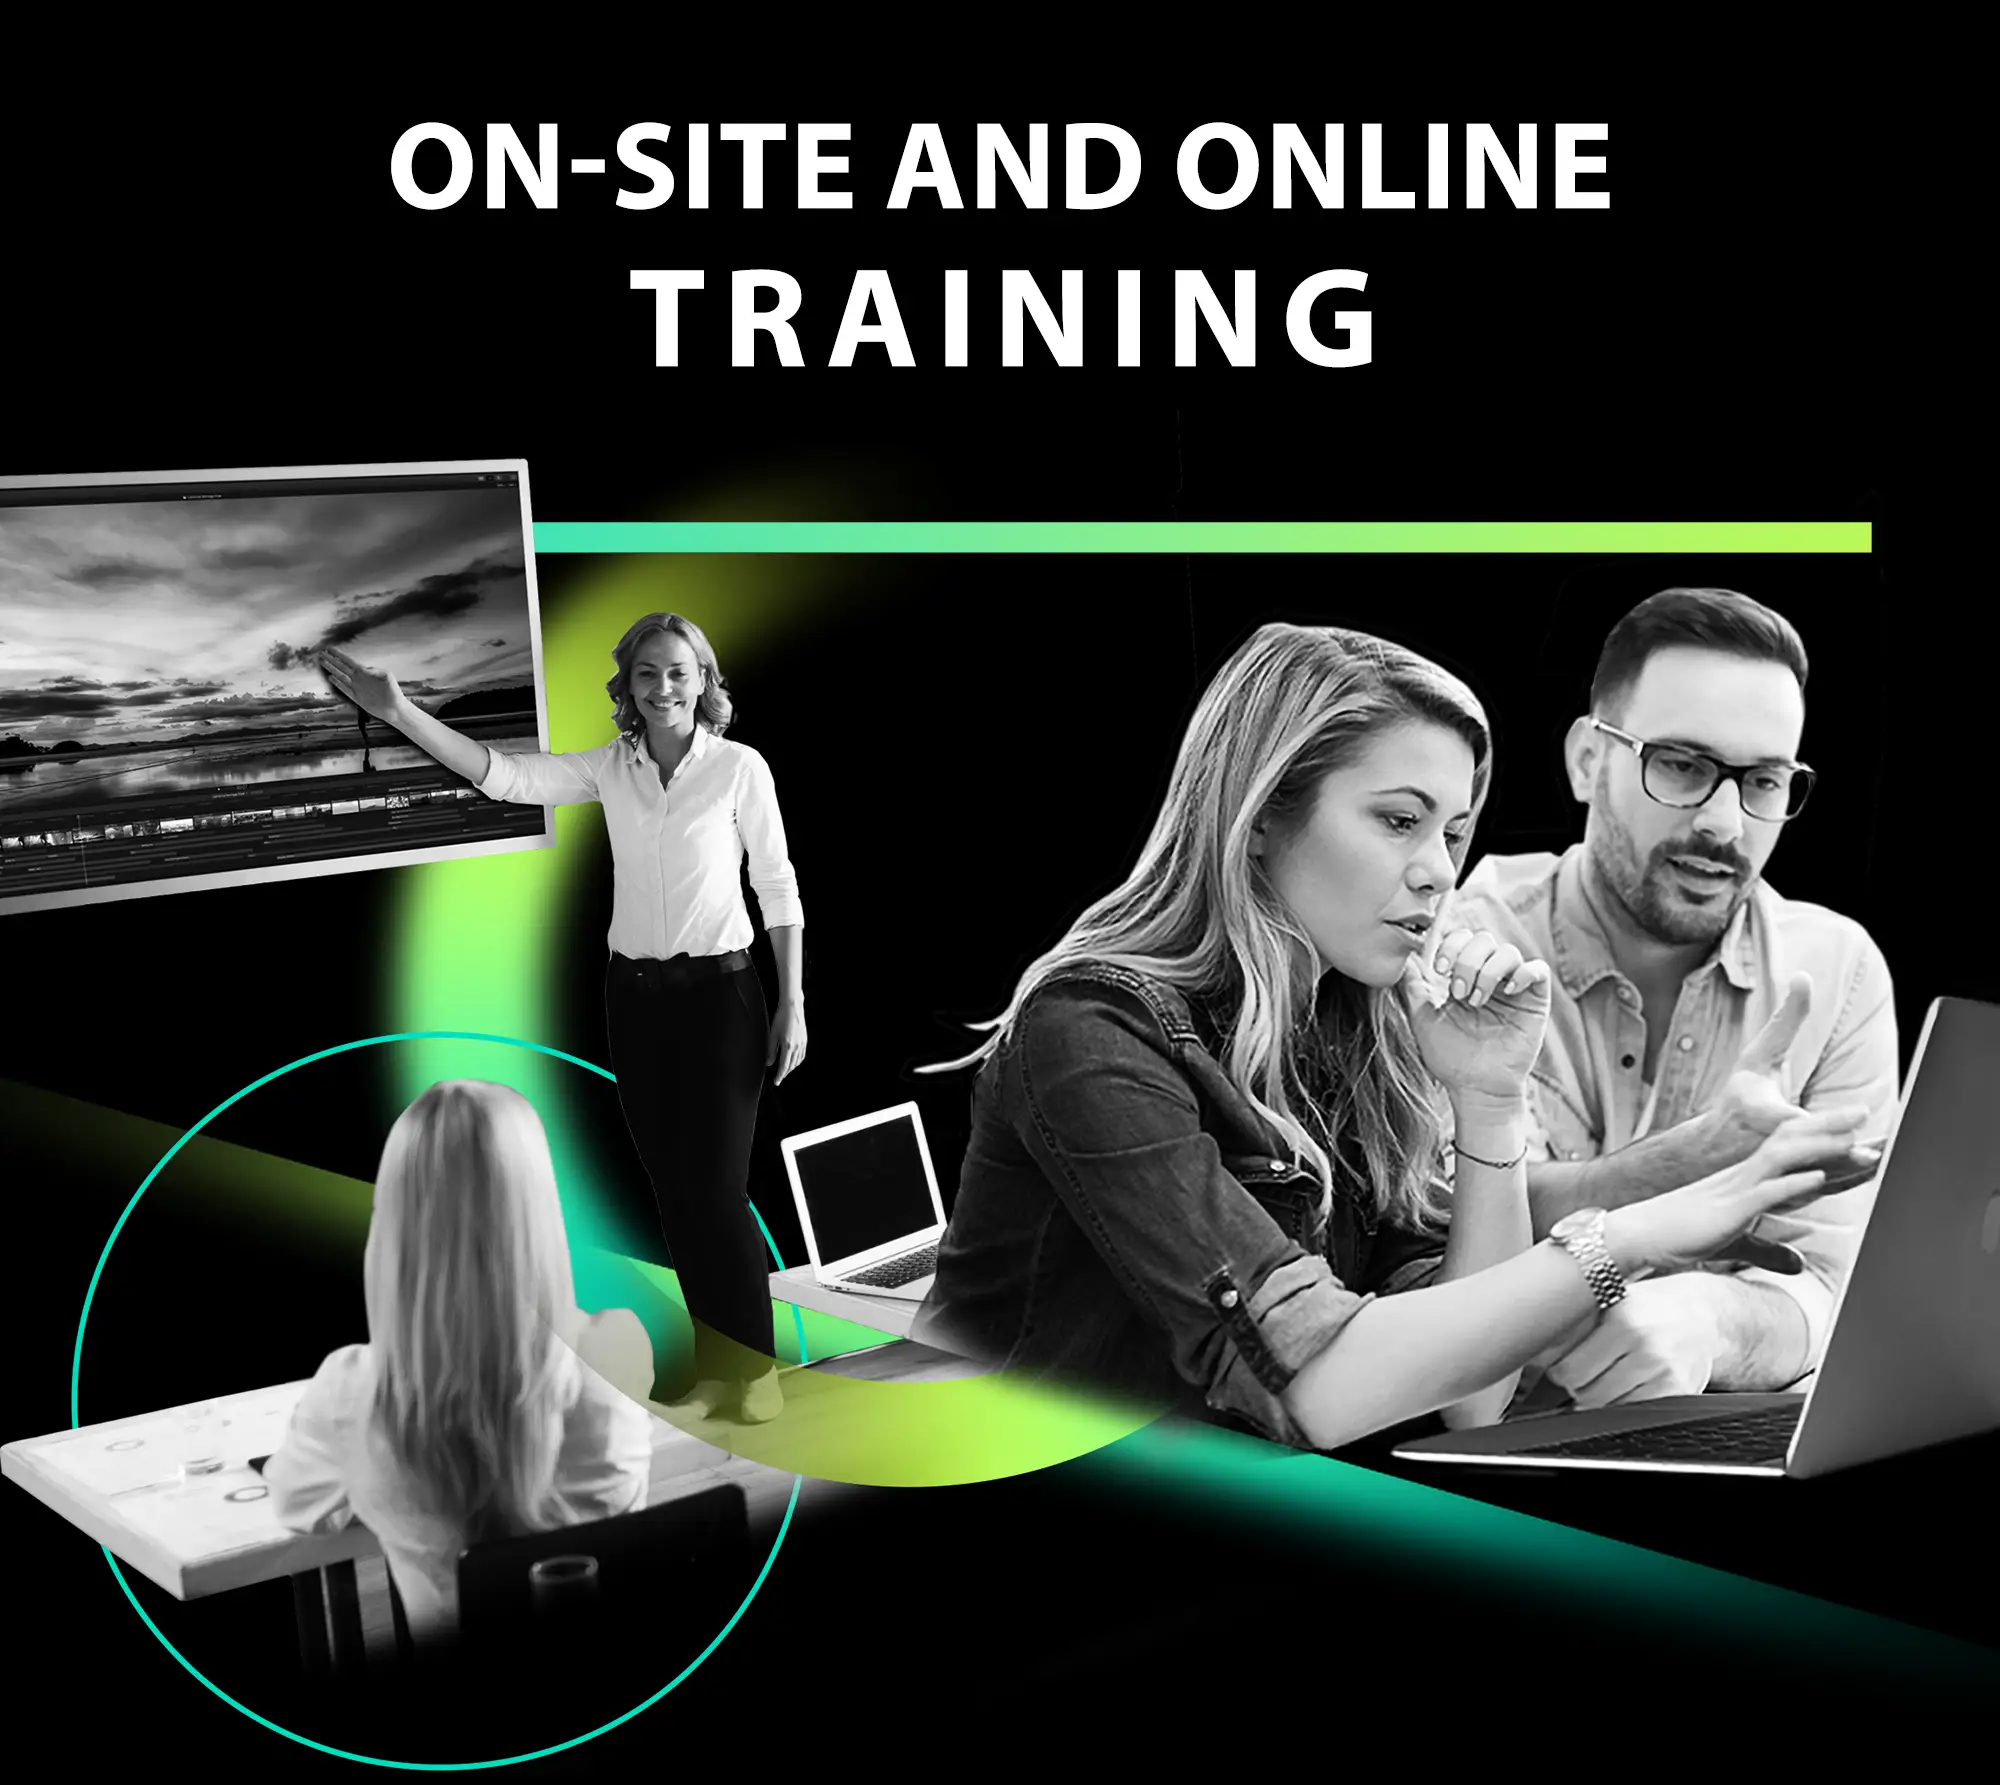 On-Site and Online Training - image collage